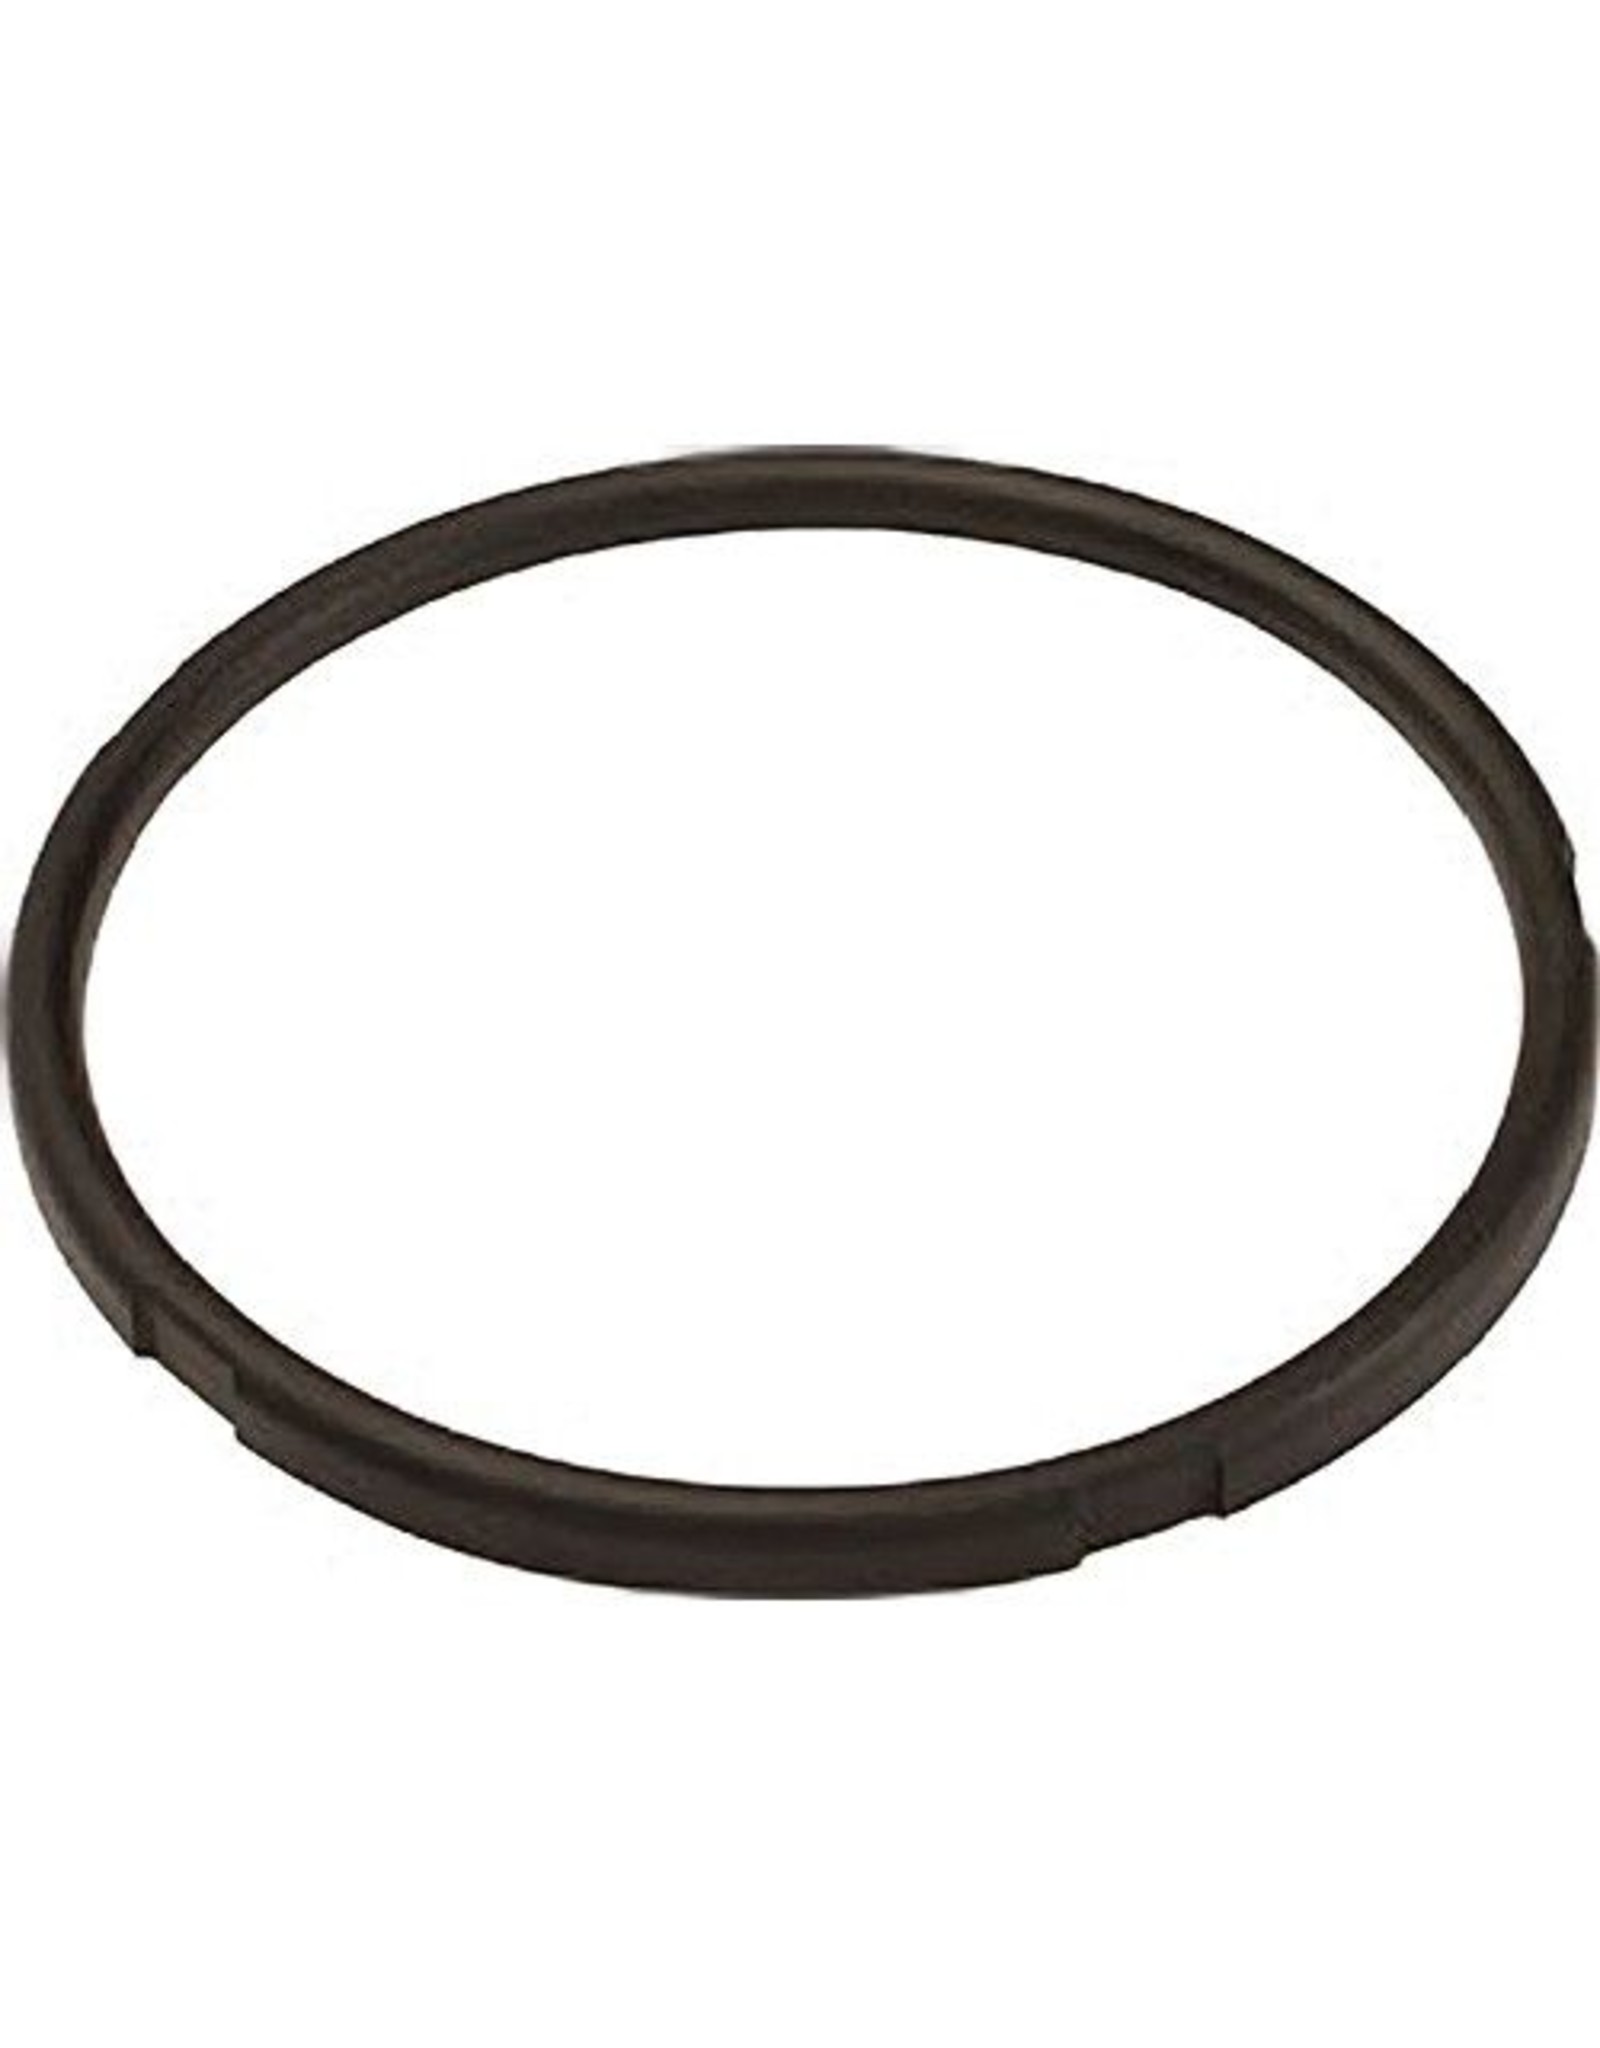 Roland 12 "rubber hoop cover for PD-125BK, PD128S-BC, PD-128BC G2117503R0